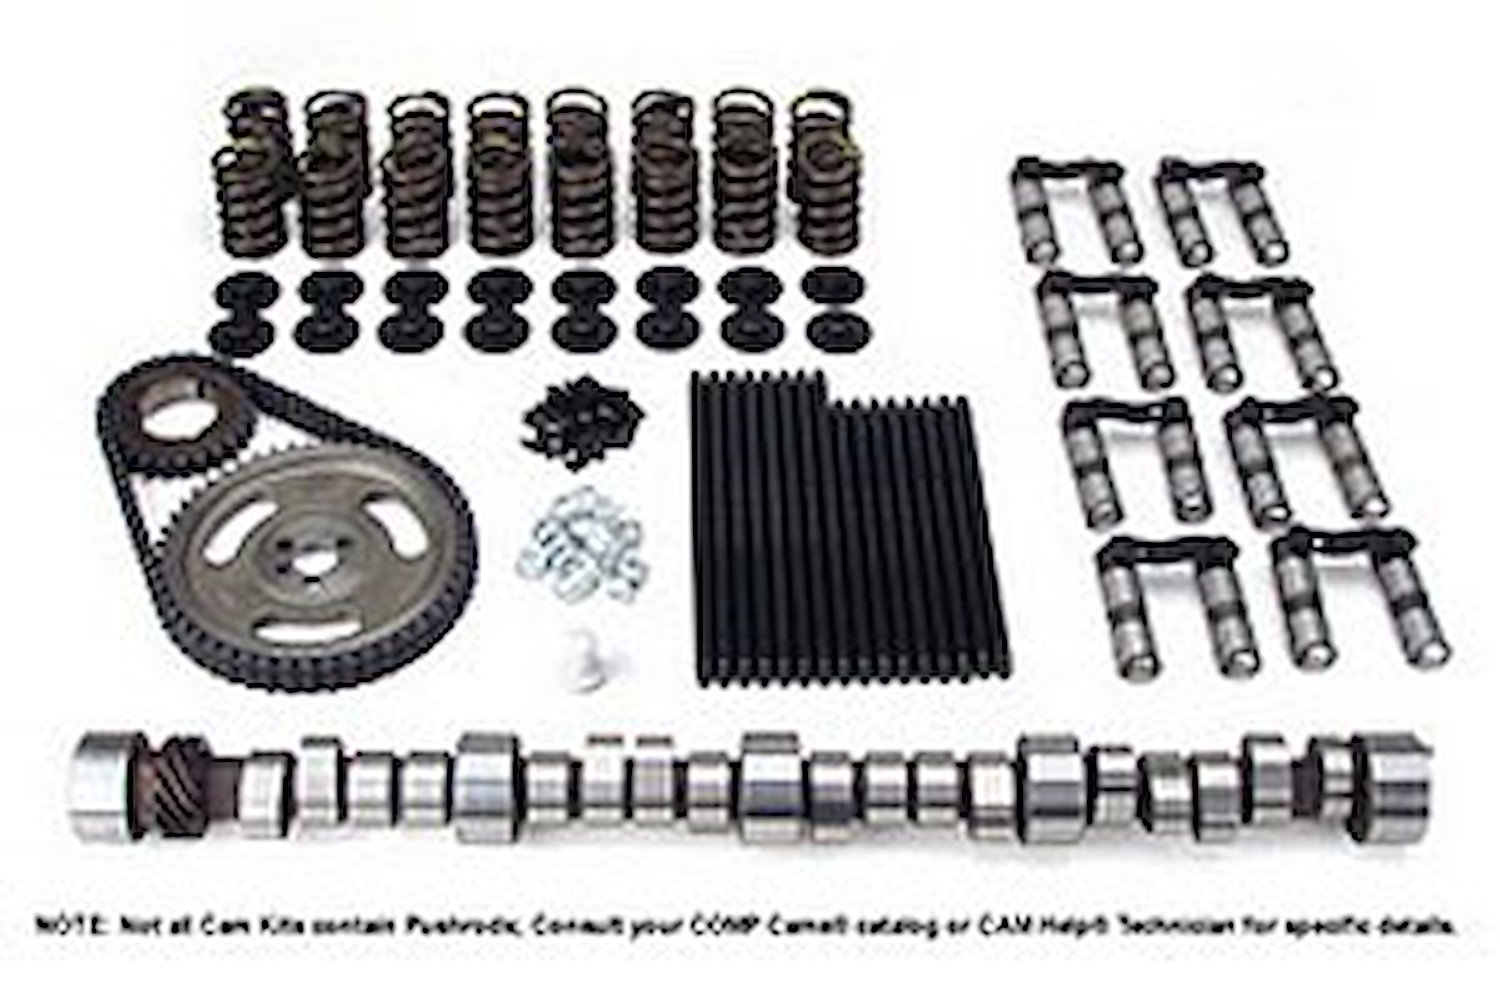 Nitrous HP Hyd. Roller Cam Complete Kit Chevy Big Block 396-454ci 1965-96 Retro-Fit Lift: .537"/.547"